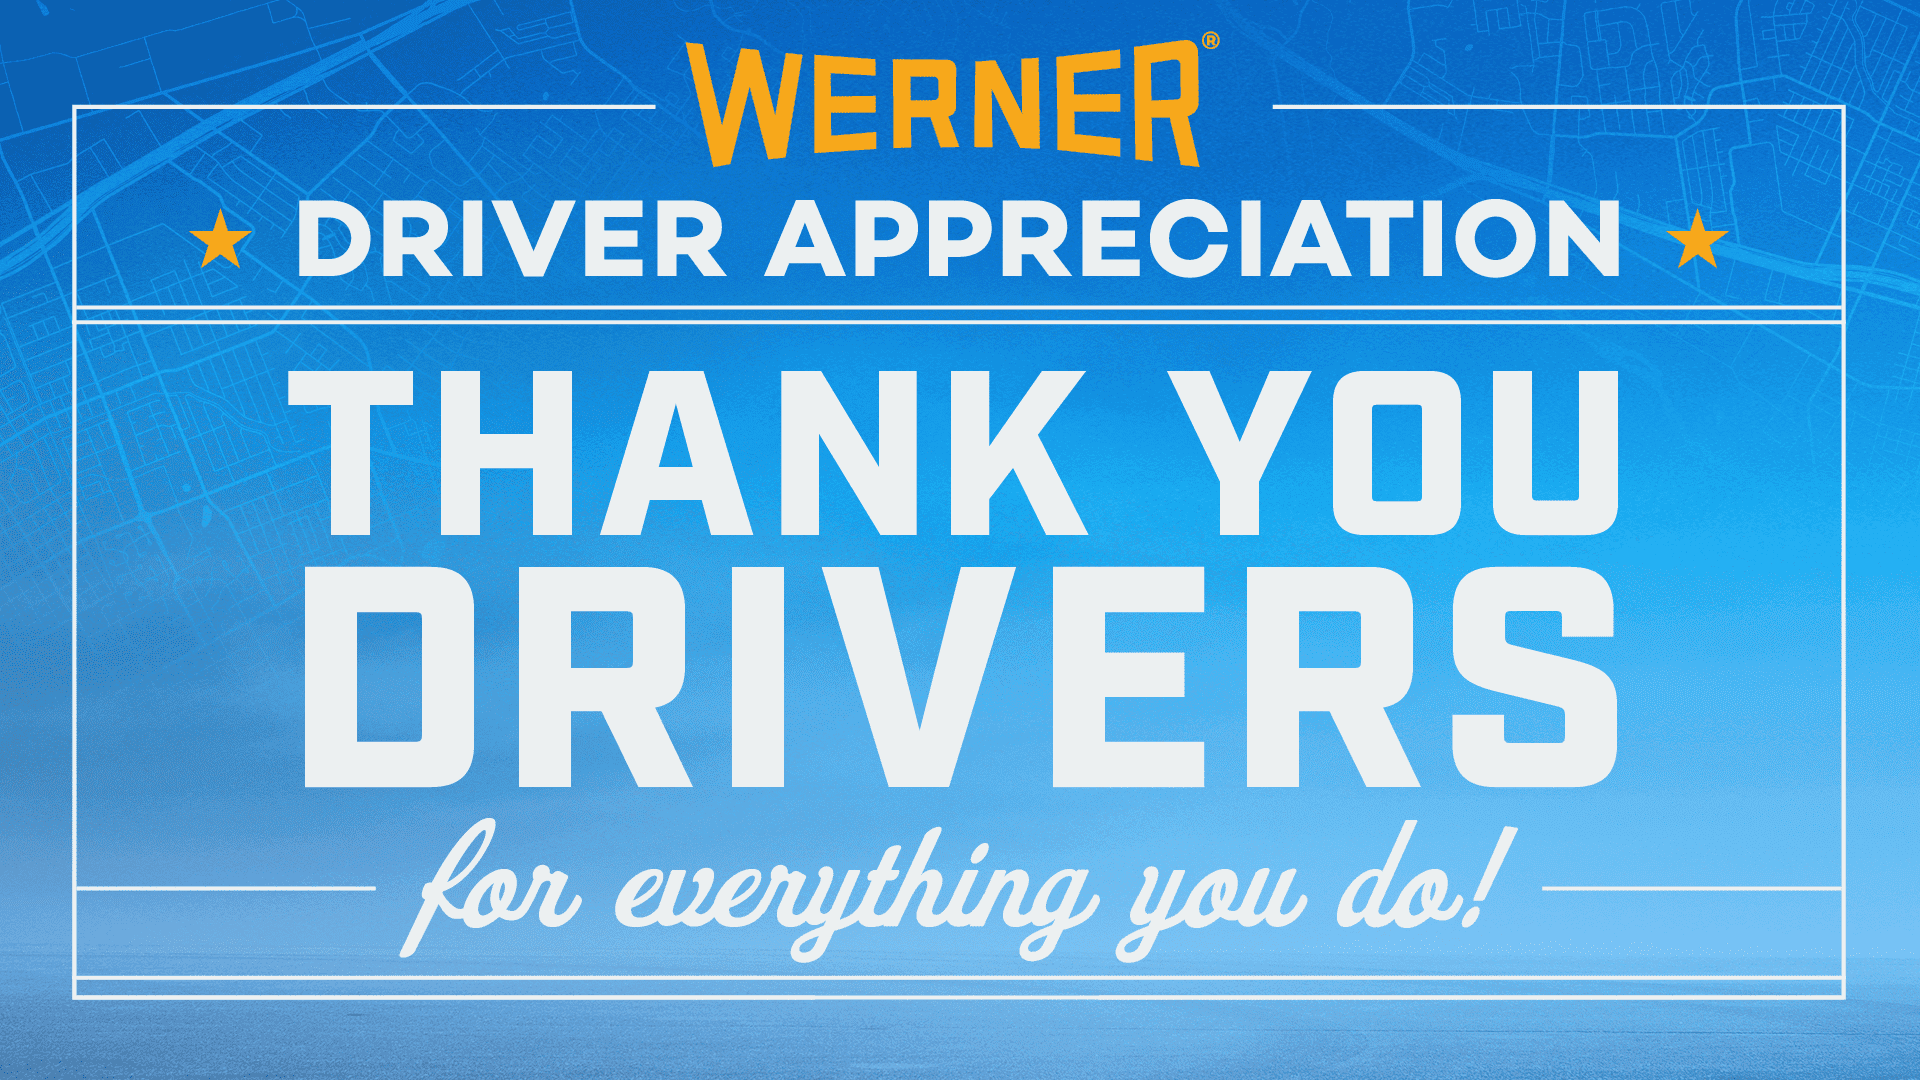 Thank you drivers